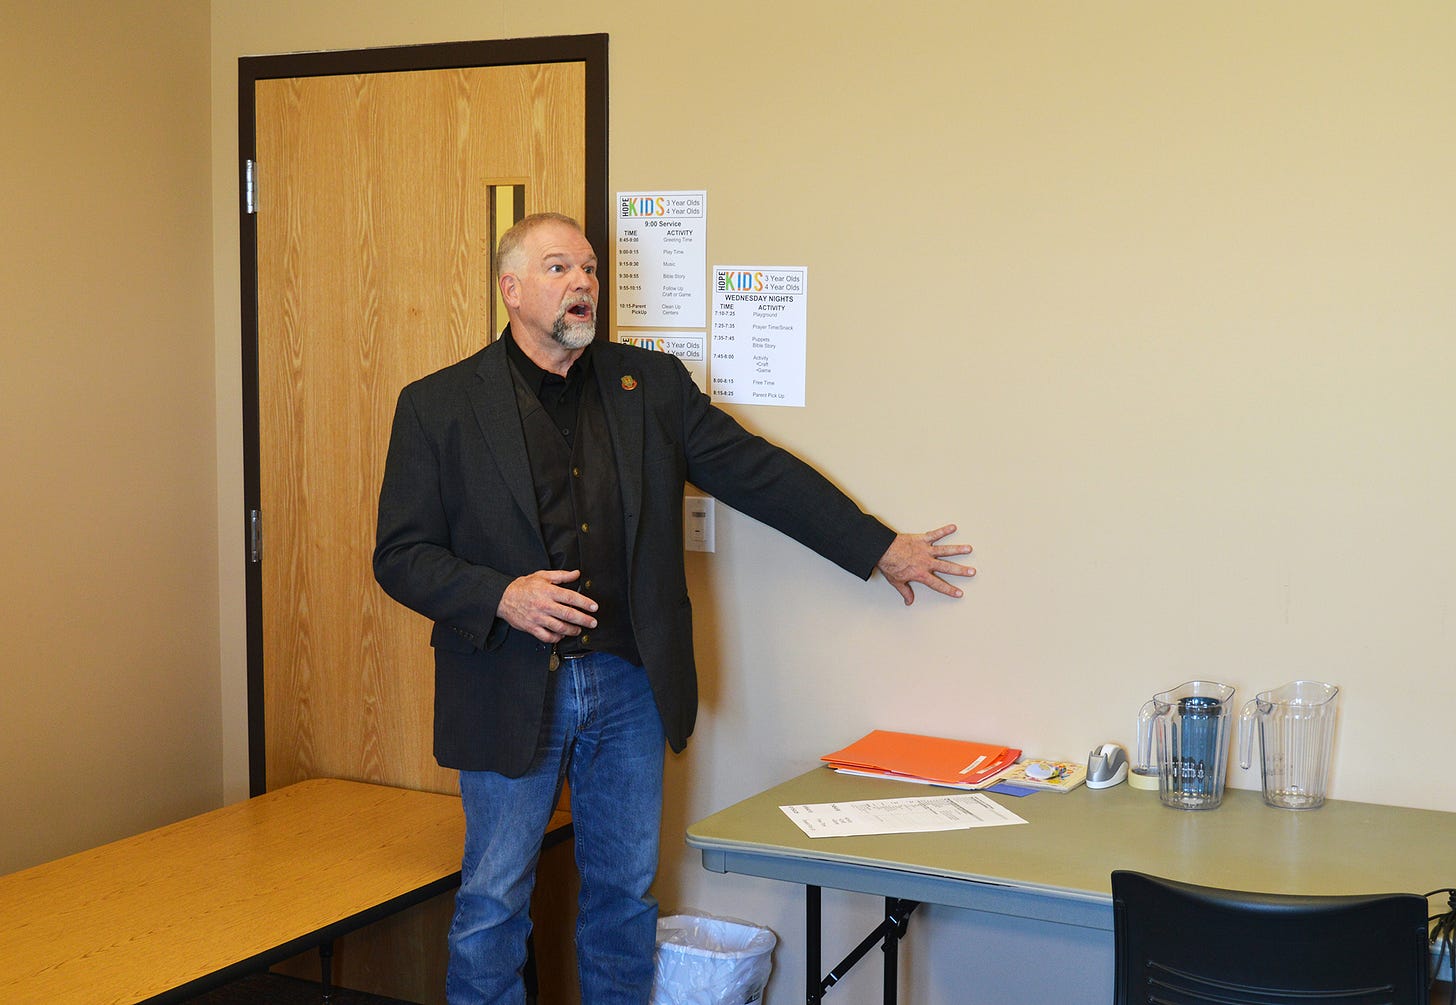  Strategos instructor Burt Whaley explains how to secure a church children’s classroom door. 